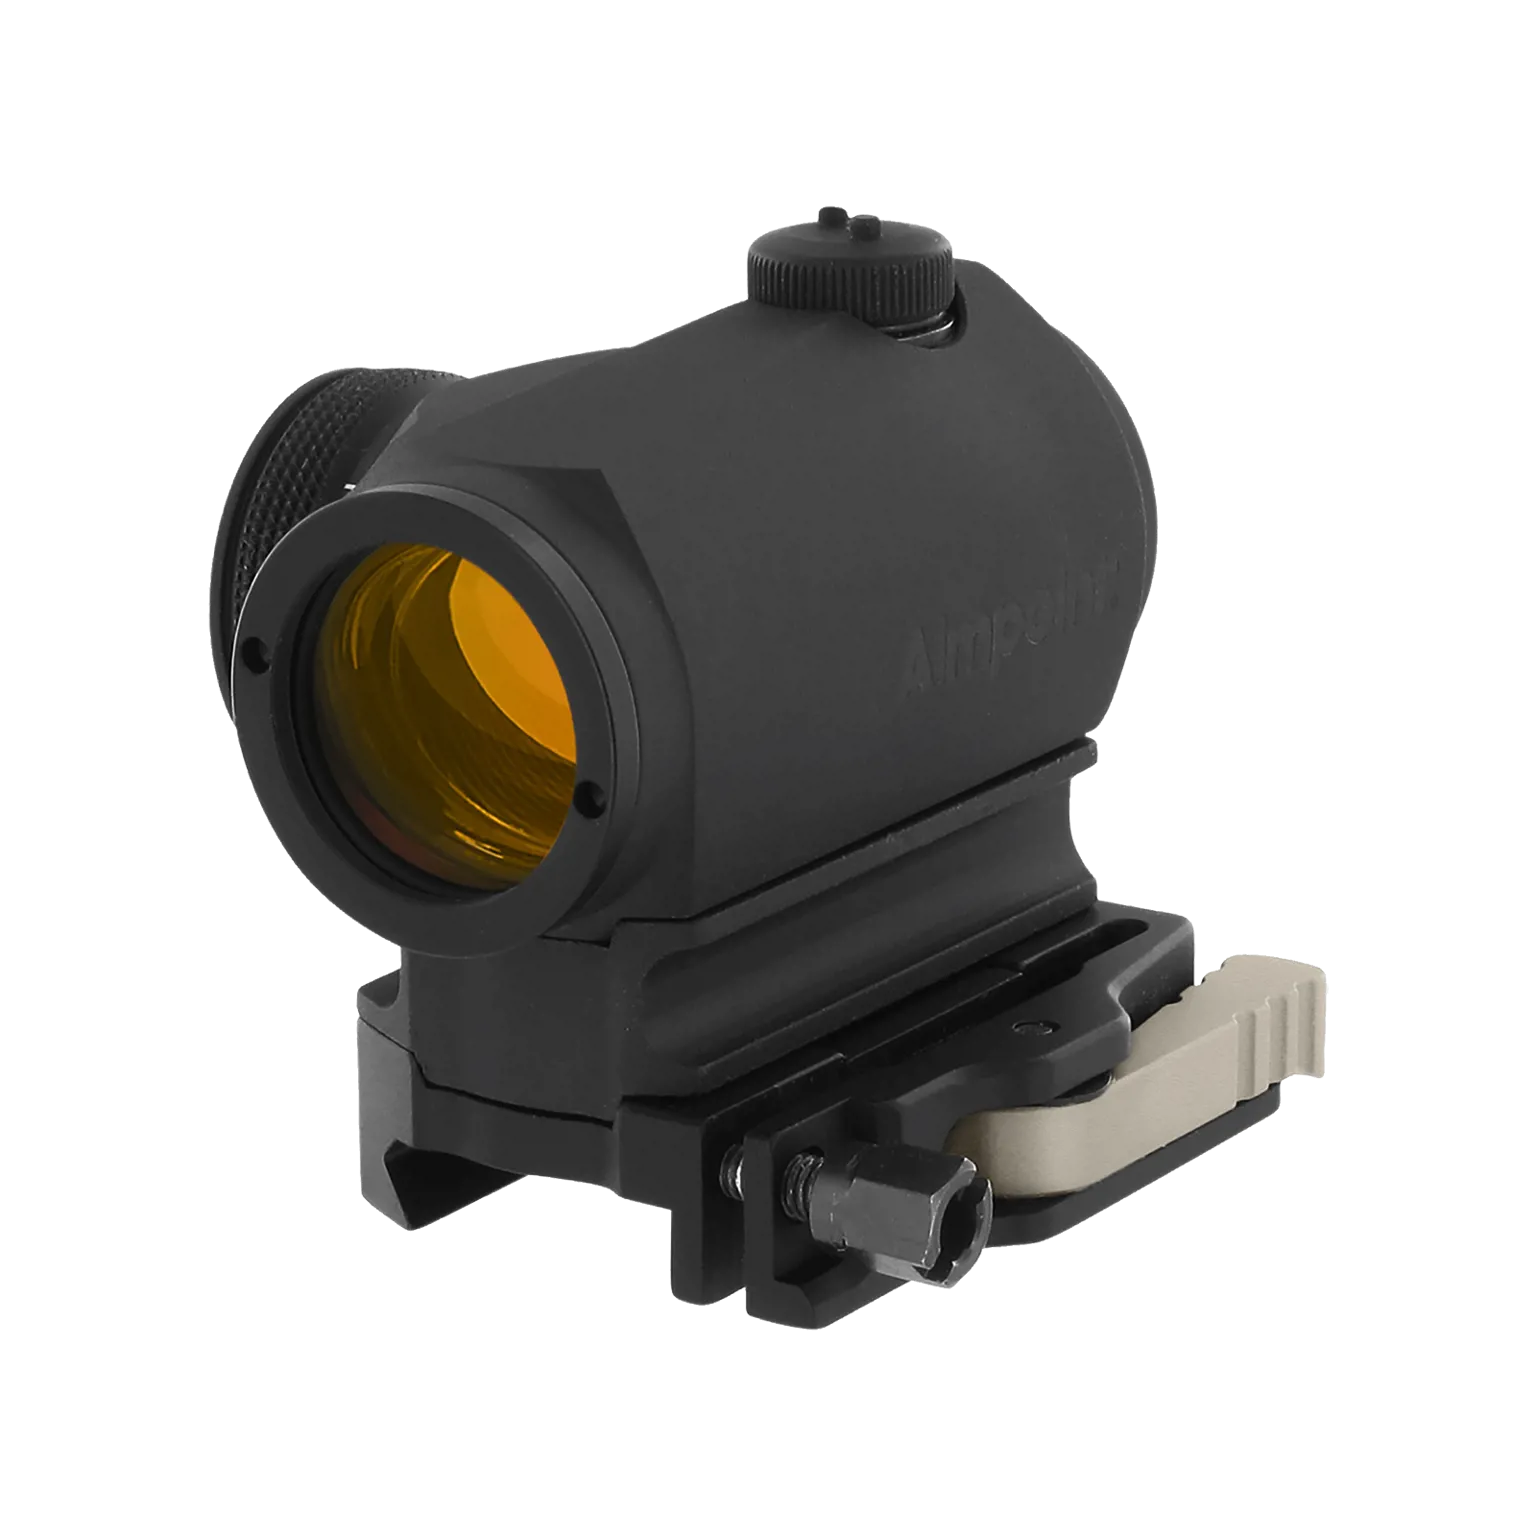 Micro T-1™ 4 MOA - Red dot reflex sight with standard mount for Weaver/Picatinny - 5